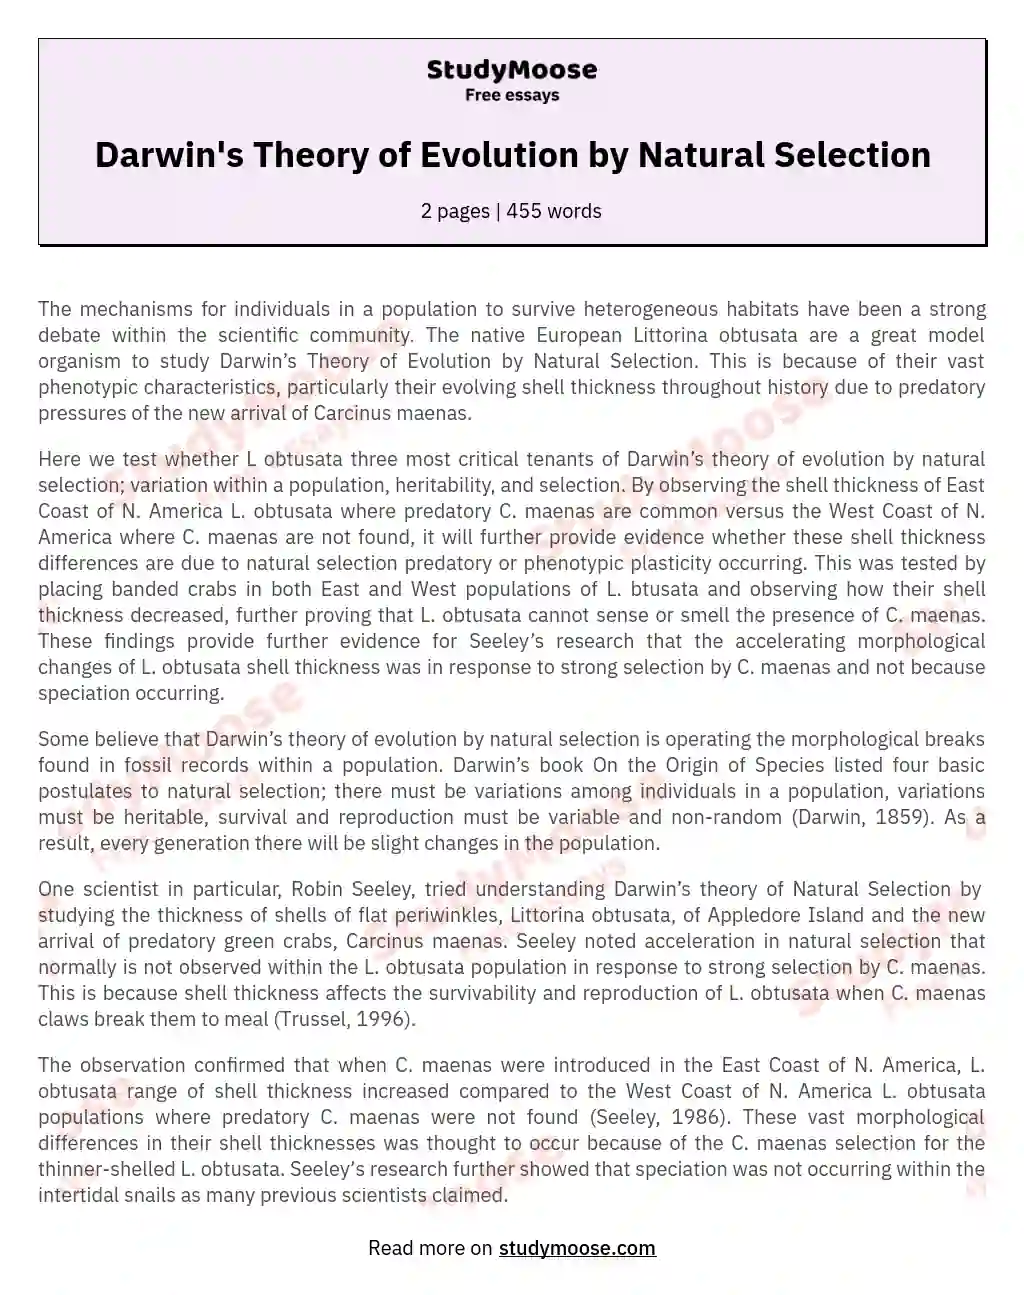 Darwin's Theory of Evolution by Natural Selection essay